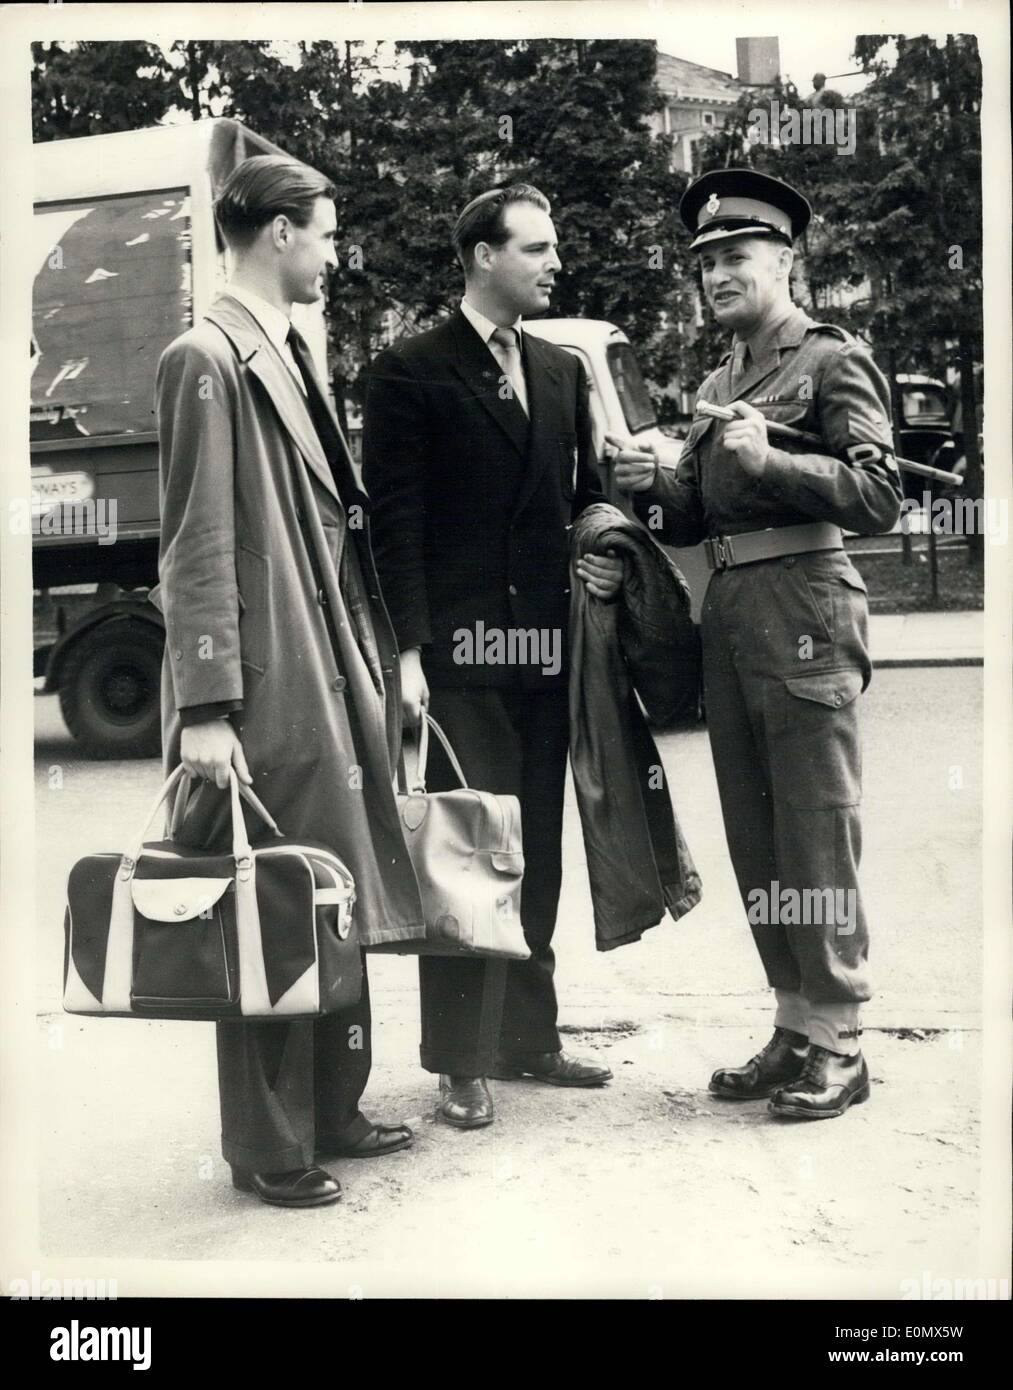 Aug. 03, 1956 - Operation Suez Begings. Life Guards recalled from leave.: Men of the Life Guards were to b seen at Combermere Barracks, Windsor, this morning packing for overseas cuty - oving to the Suez Canal emergecny.: Photo shows L-R: Trooper R. Pidcock of Chesterfield, Derby and CPL. of the horse L.V. Barratt of Wolverhampton - both recalled from leave - talking to CPL. of the Horse K. Morgan of the Military Police - as they arrive at Combermere Barracks today. Stock Photo